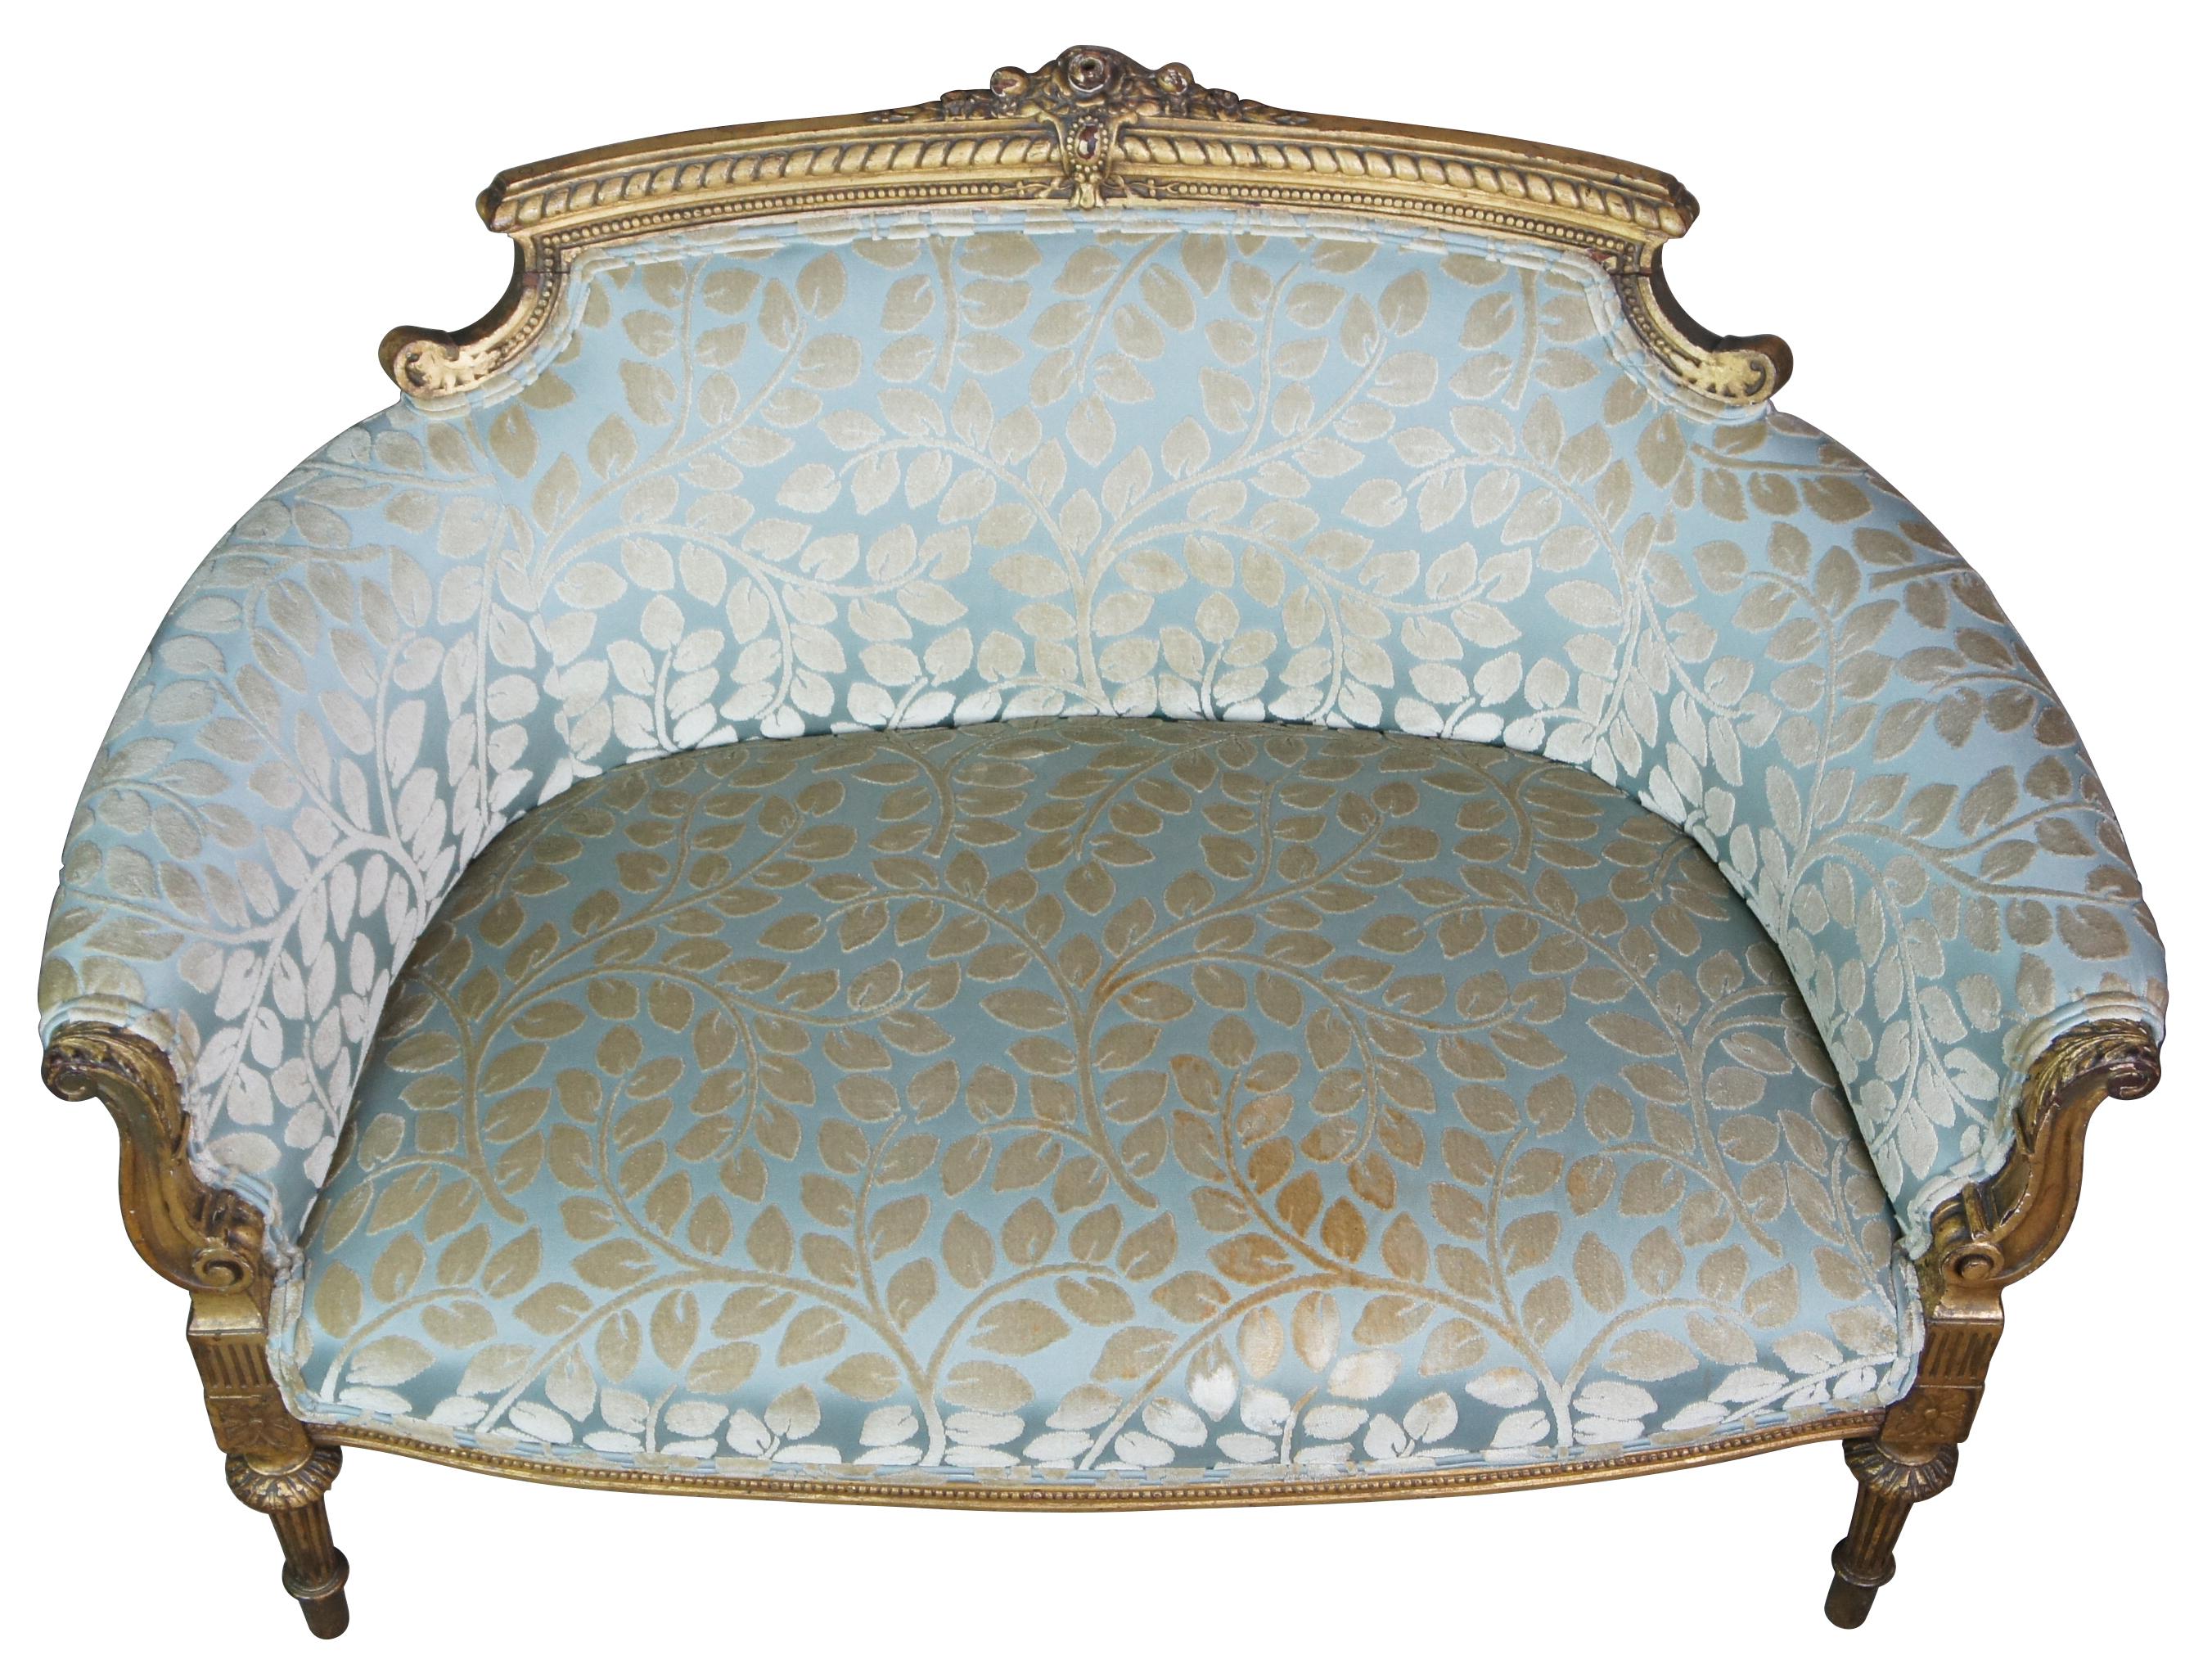 A quaint mid-19th century French settee. Features a flared and carved giltwood frame with a light blue upholstering featuring a raised white velour floral leaf pattern. Includes classical Louis XVI motifs with floral medallions, turned and tapered